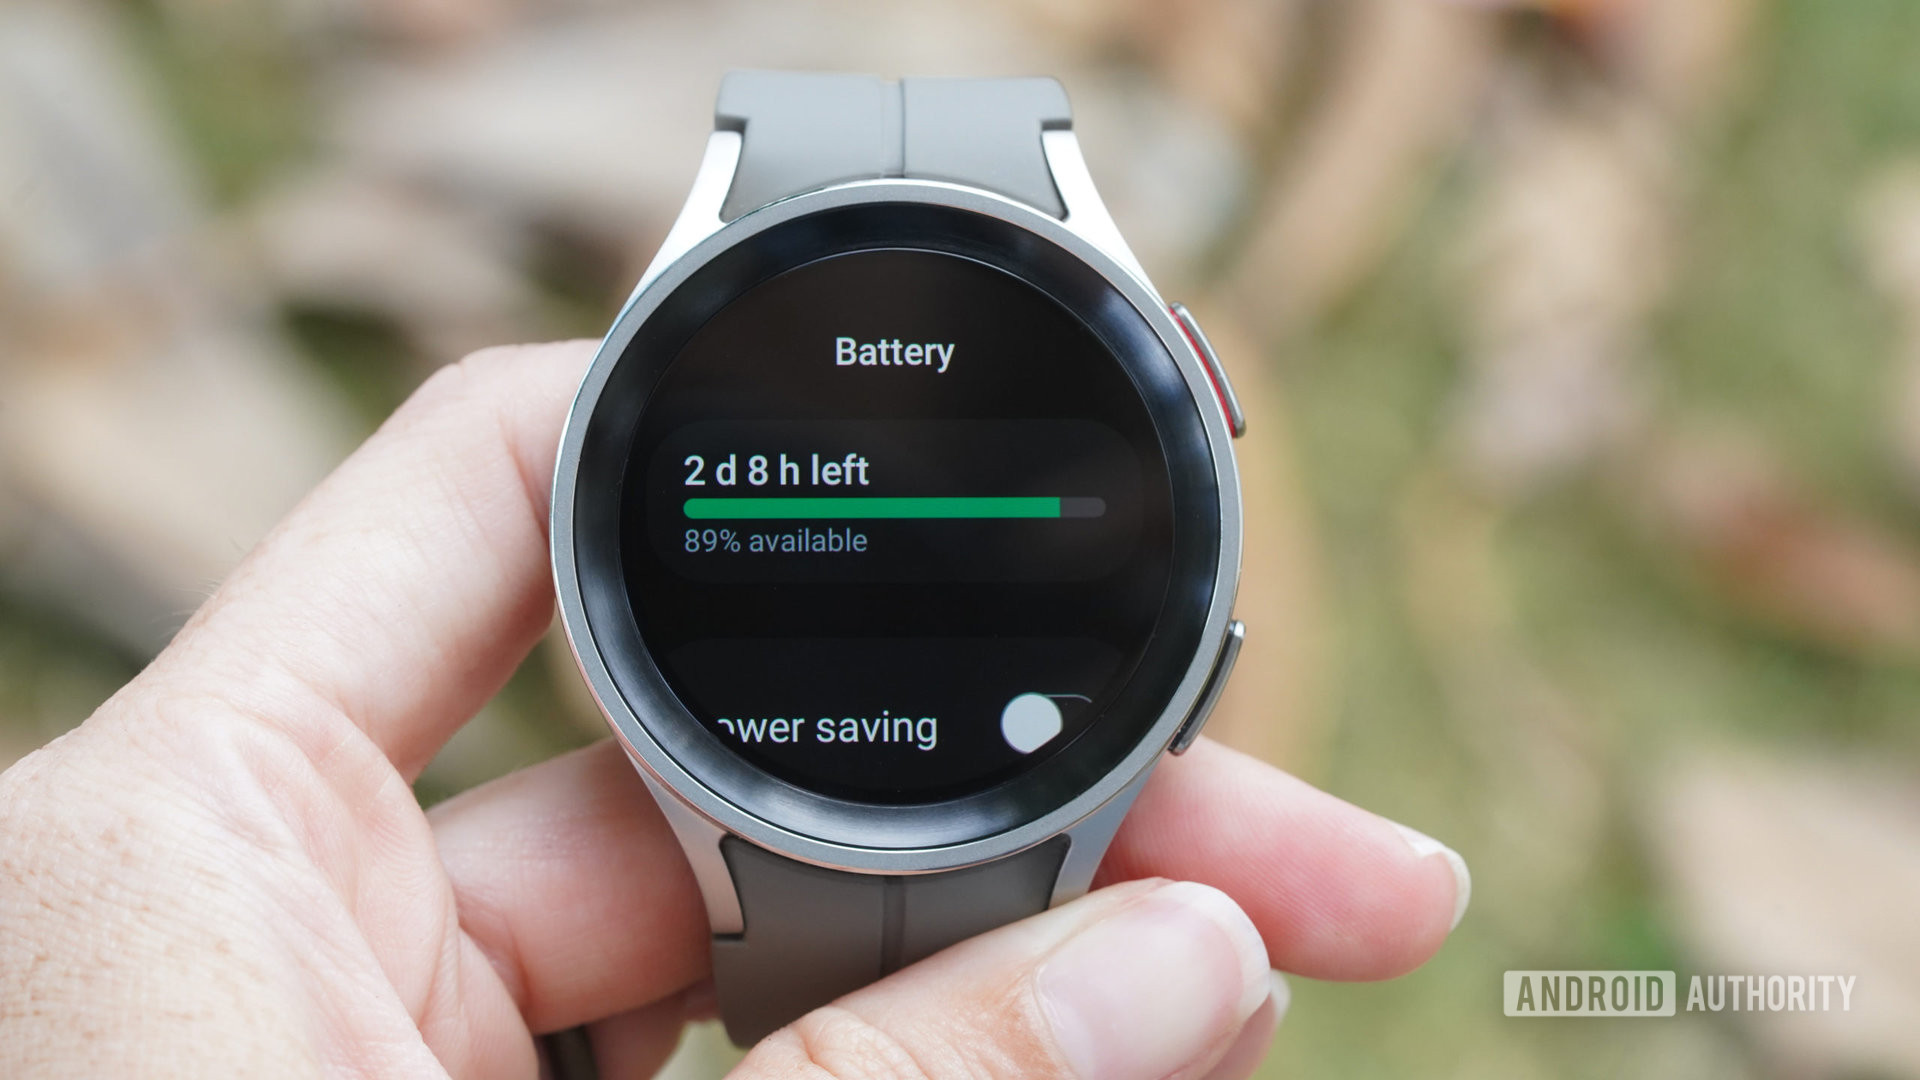 A user reviews the battery life remaining on her Samsung Galaxy Watch 5 Pro.